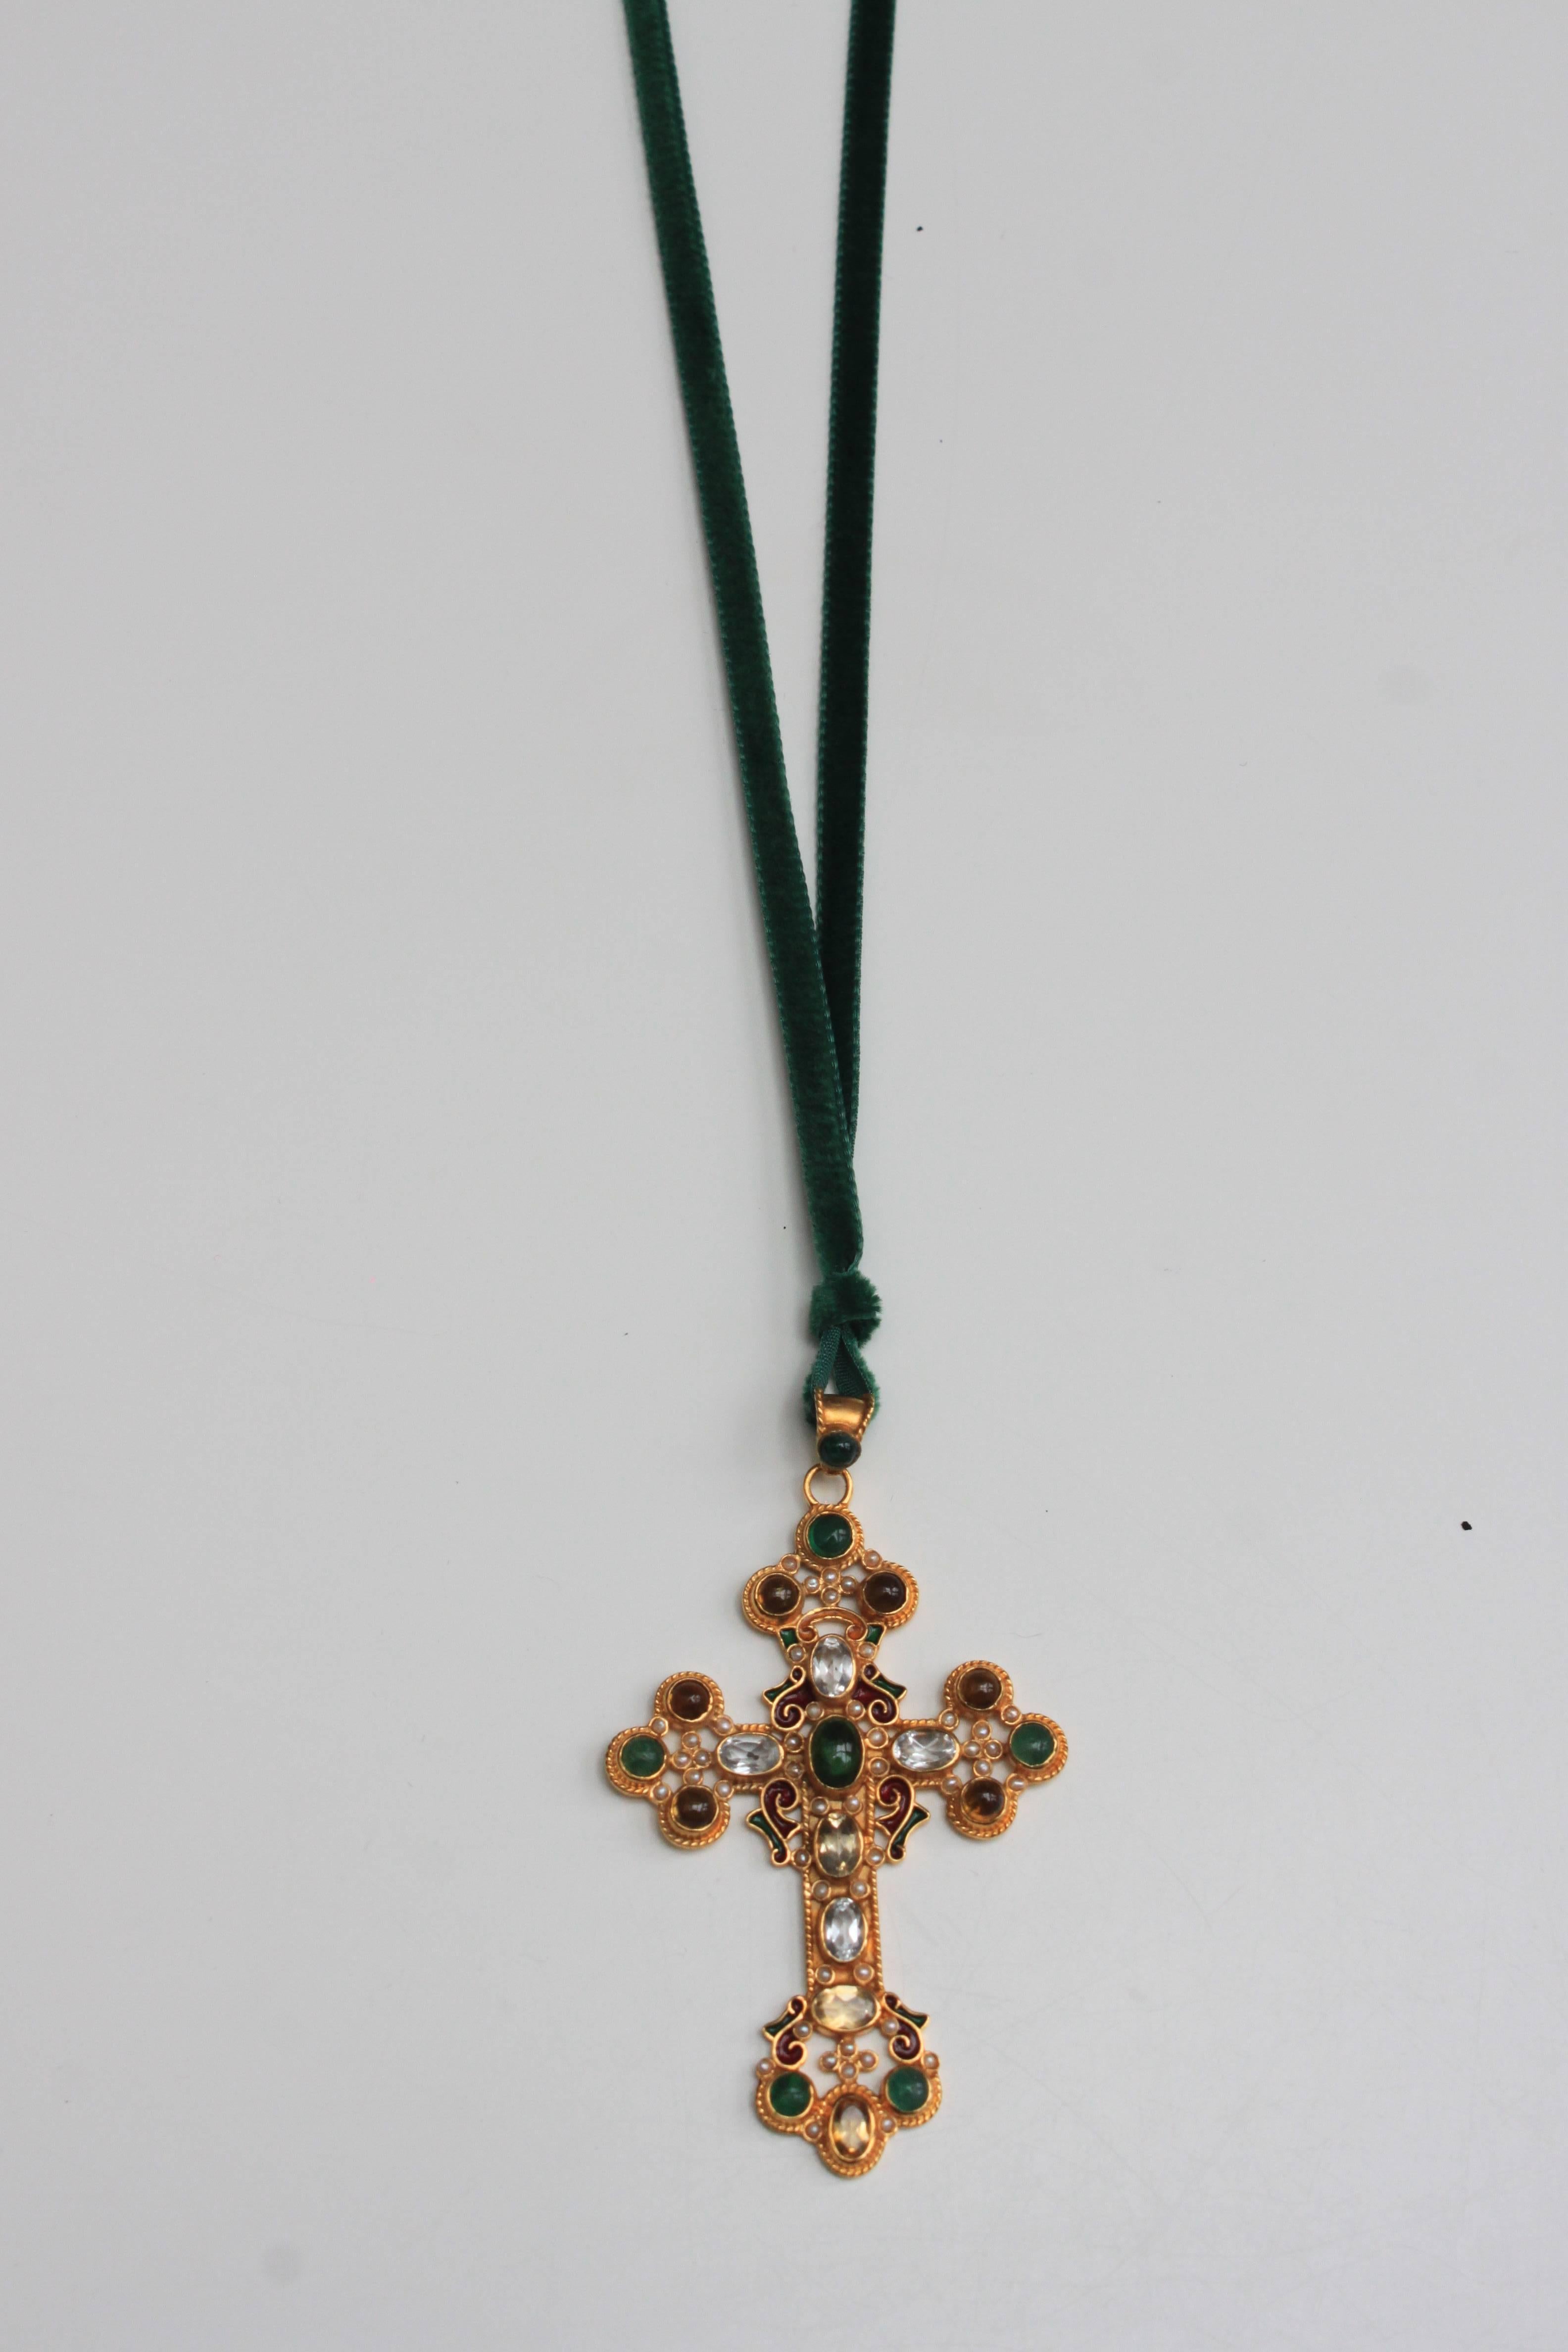 The cross is made from argento silver and gold-plated with precious stones citrine, garnet, micro pearls. It is a one of a kind piece designed by Diego Percossi Papi as part of an exclusive collection of pendants for the Casa Cabana Pop Up Shop.